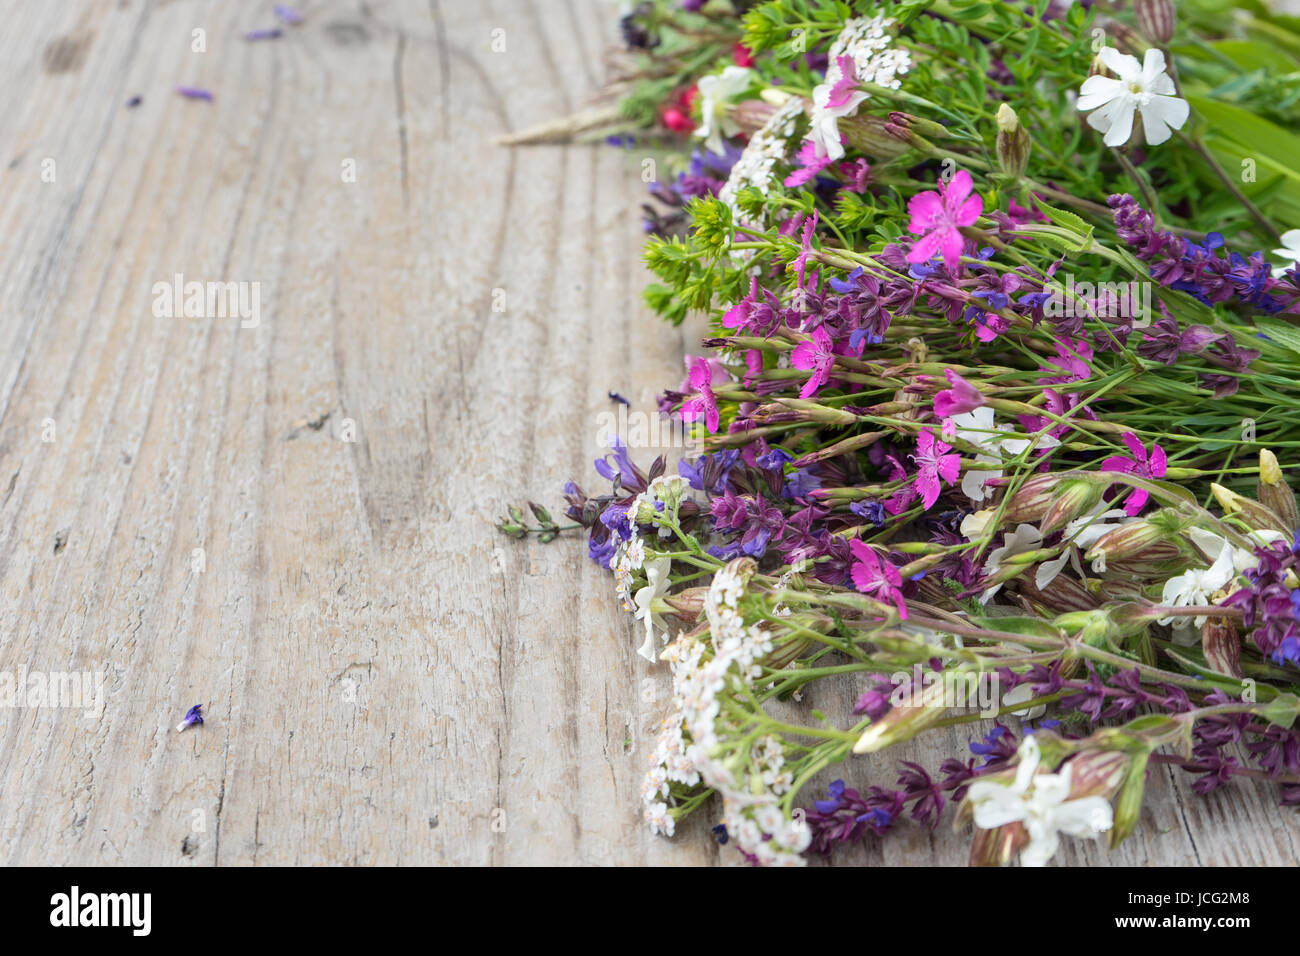 Colorful meadow flowers on a wooden table Stock Photo